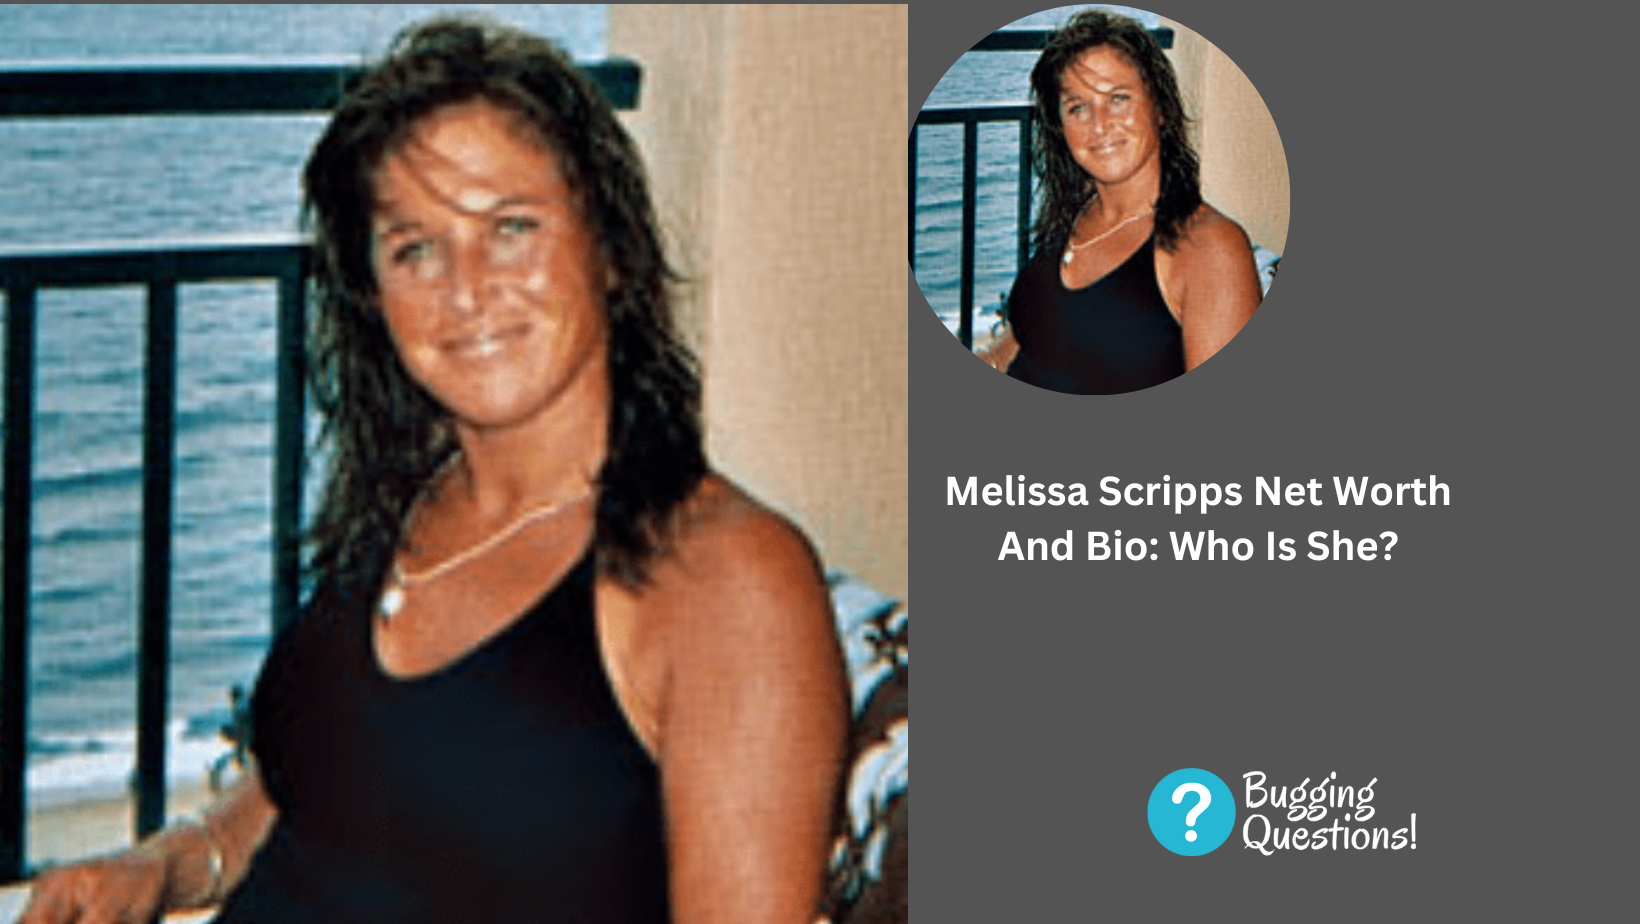 Melissa Scripps Net Worth And Bio: Who Is She?